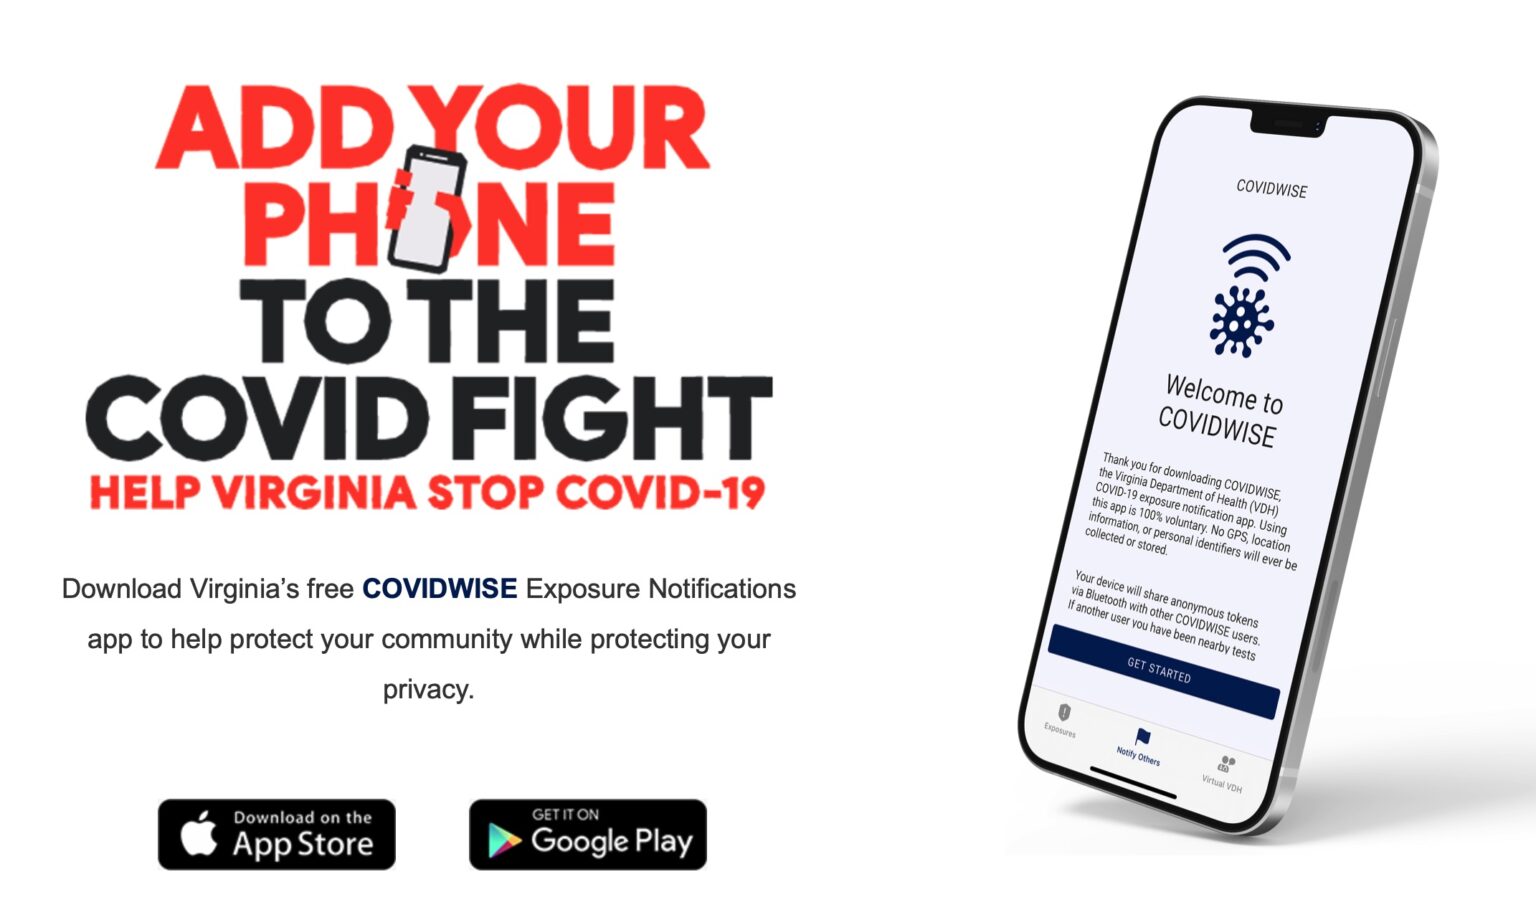 Virginia's COVIDWISE contact-tracing app uses the Exposure Notifications API developed by Apple and Google.